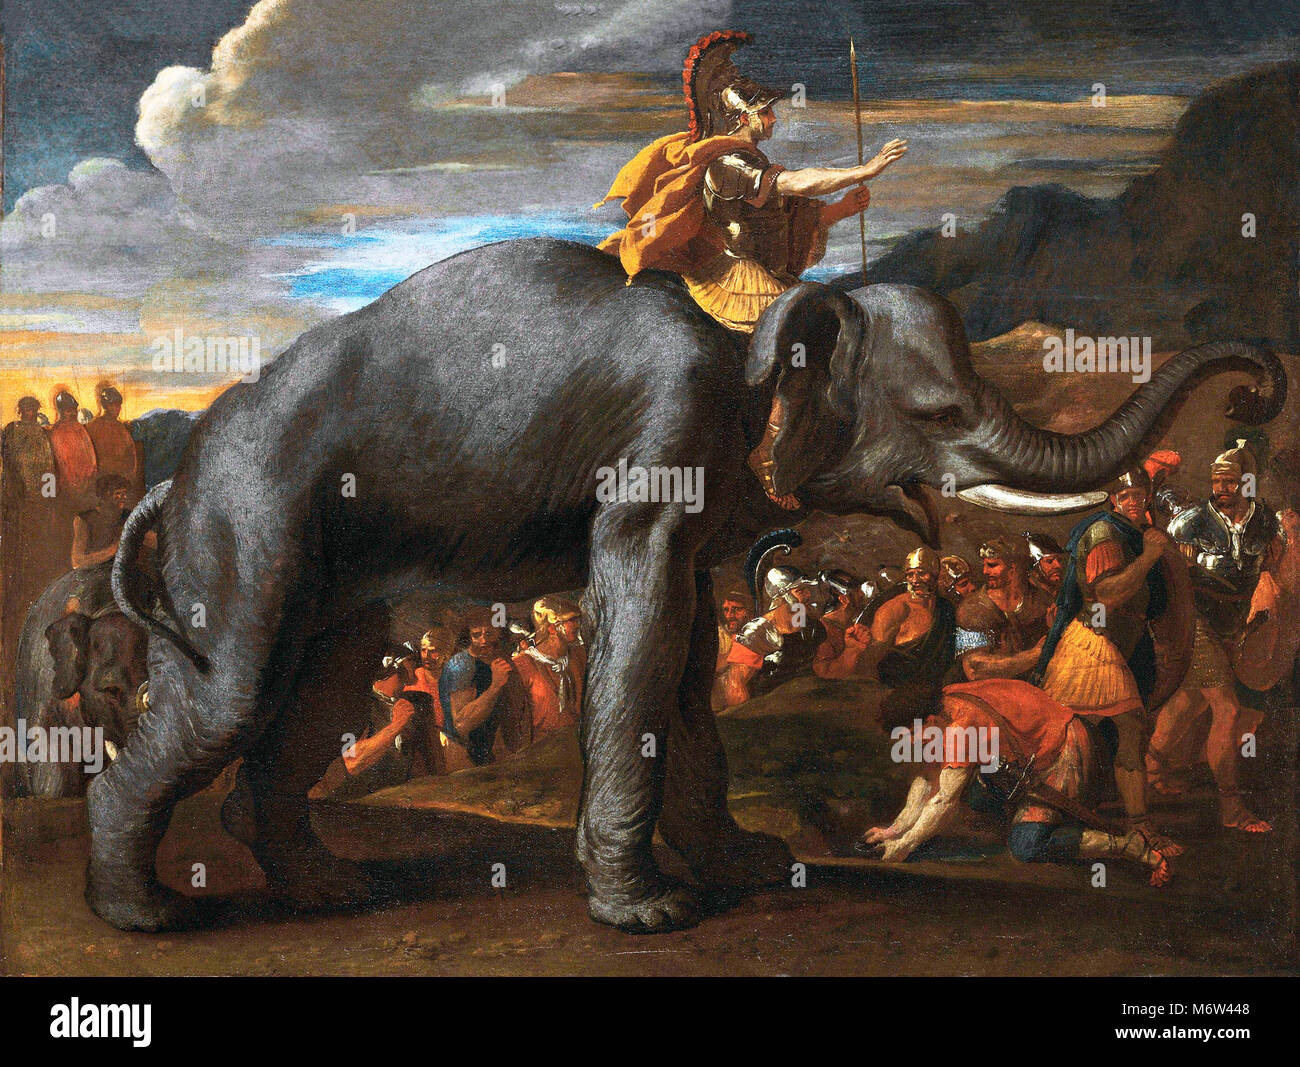 Hannibal crossing the Alps on Elephants by Nicholas Poussin, oil on canvas, 1625-6 Stock Photo